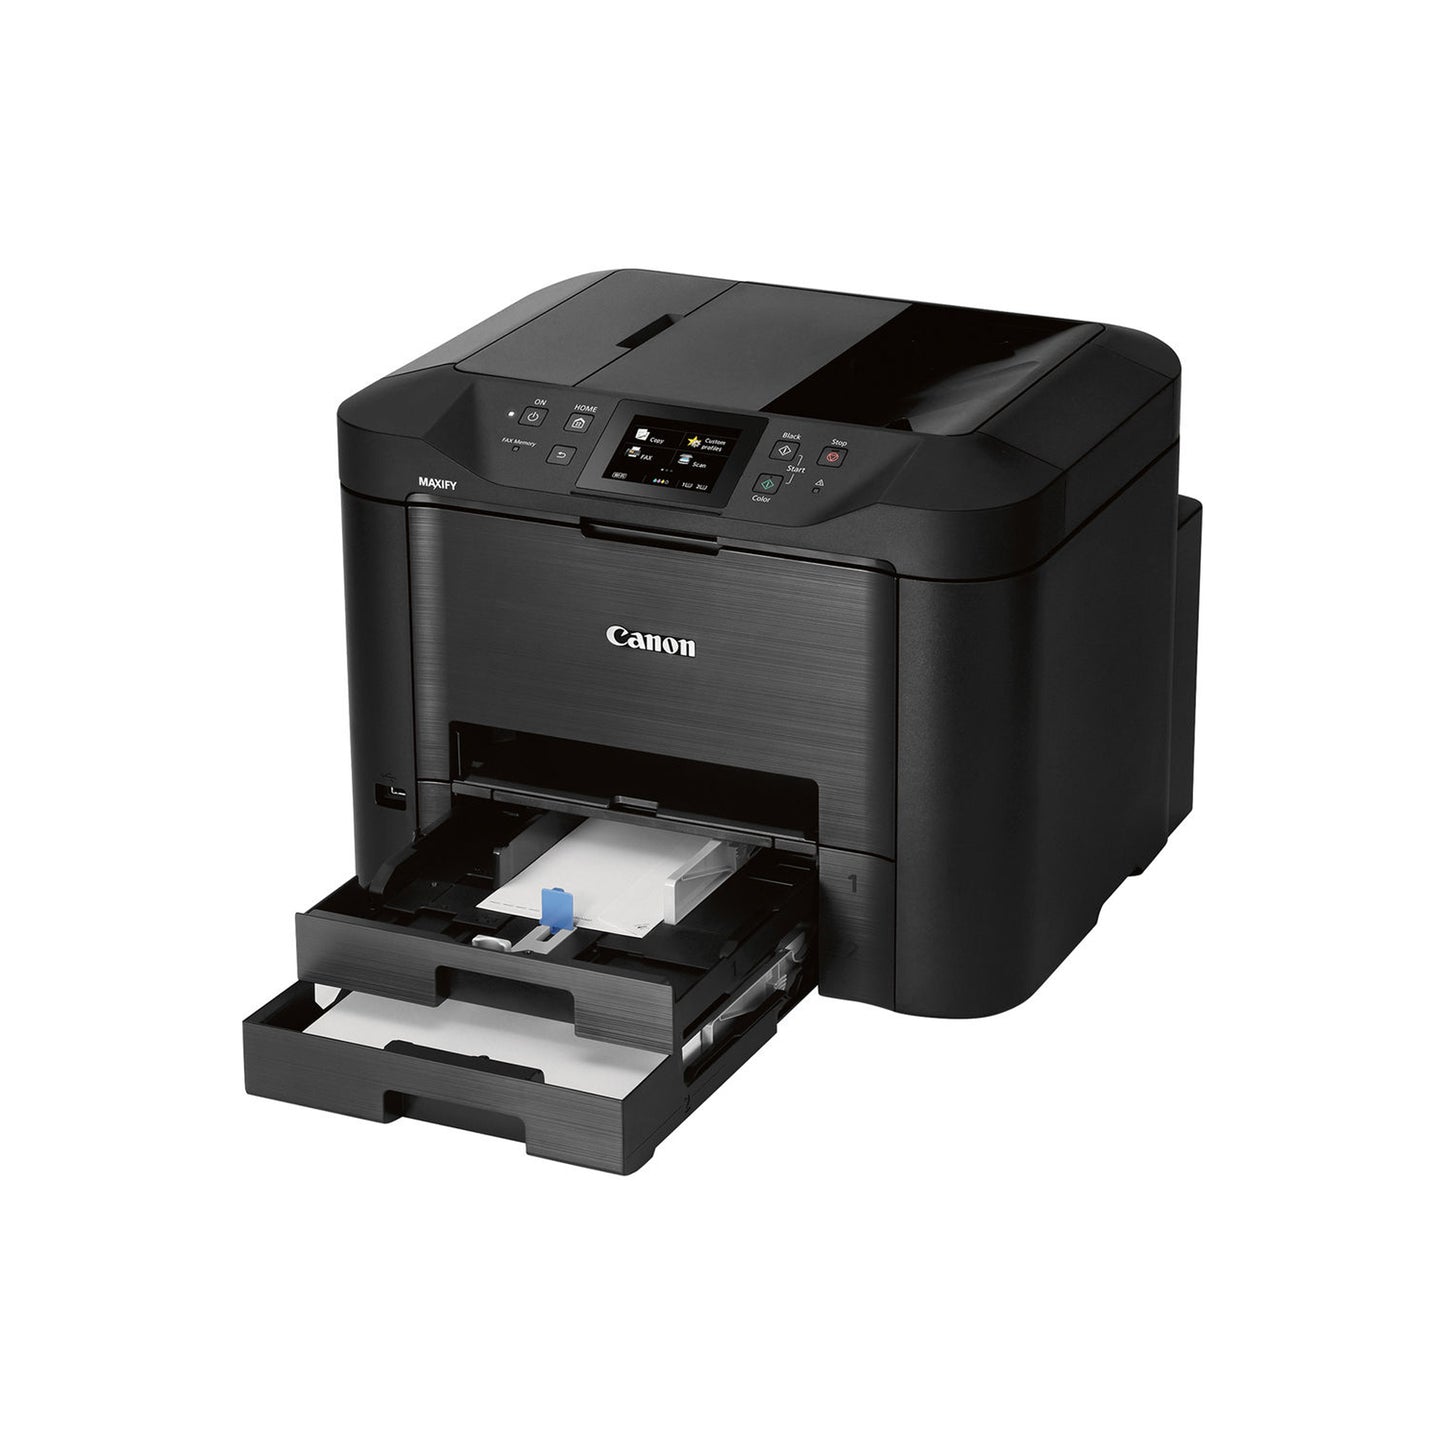 Canon Office and Business MB5420 Wireless All-in-One Printer,Scanner, Copier and Fax, with Mobile and Duplex Printing, Black, Desktop